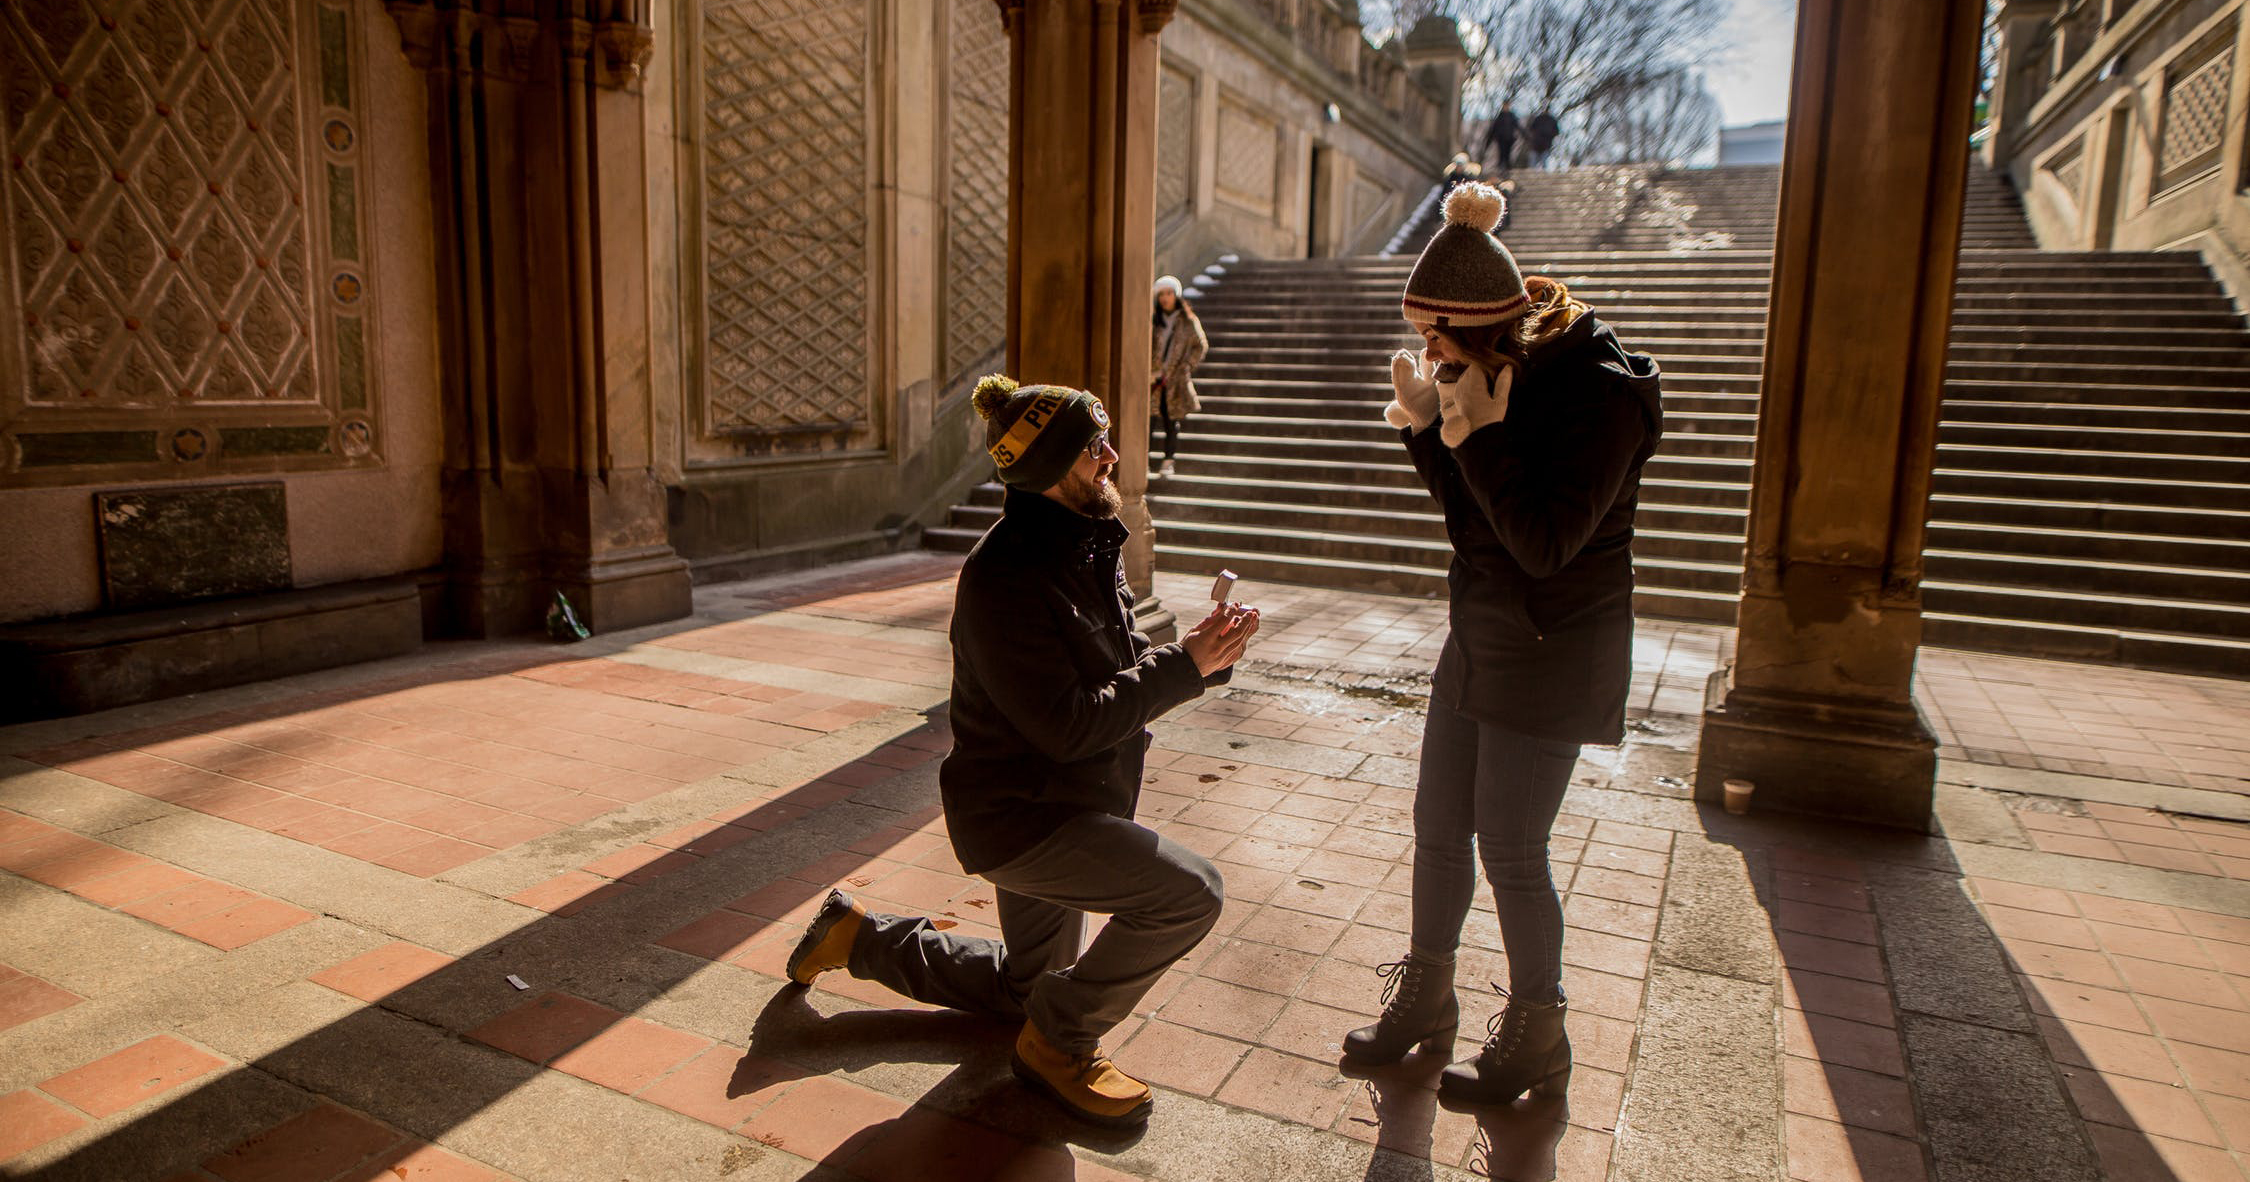 Man proposing to woman outside of historic building.